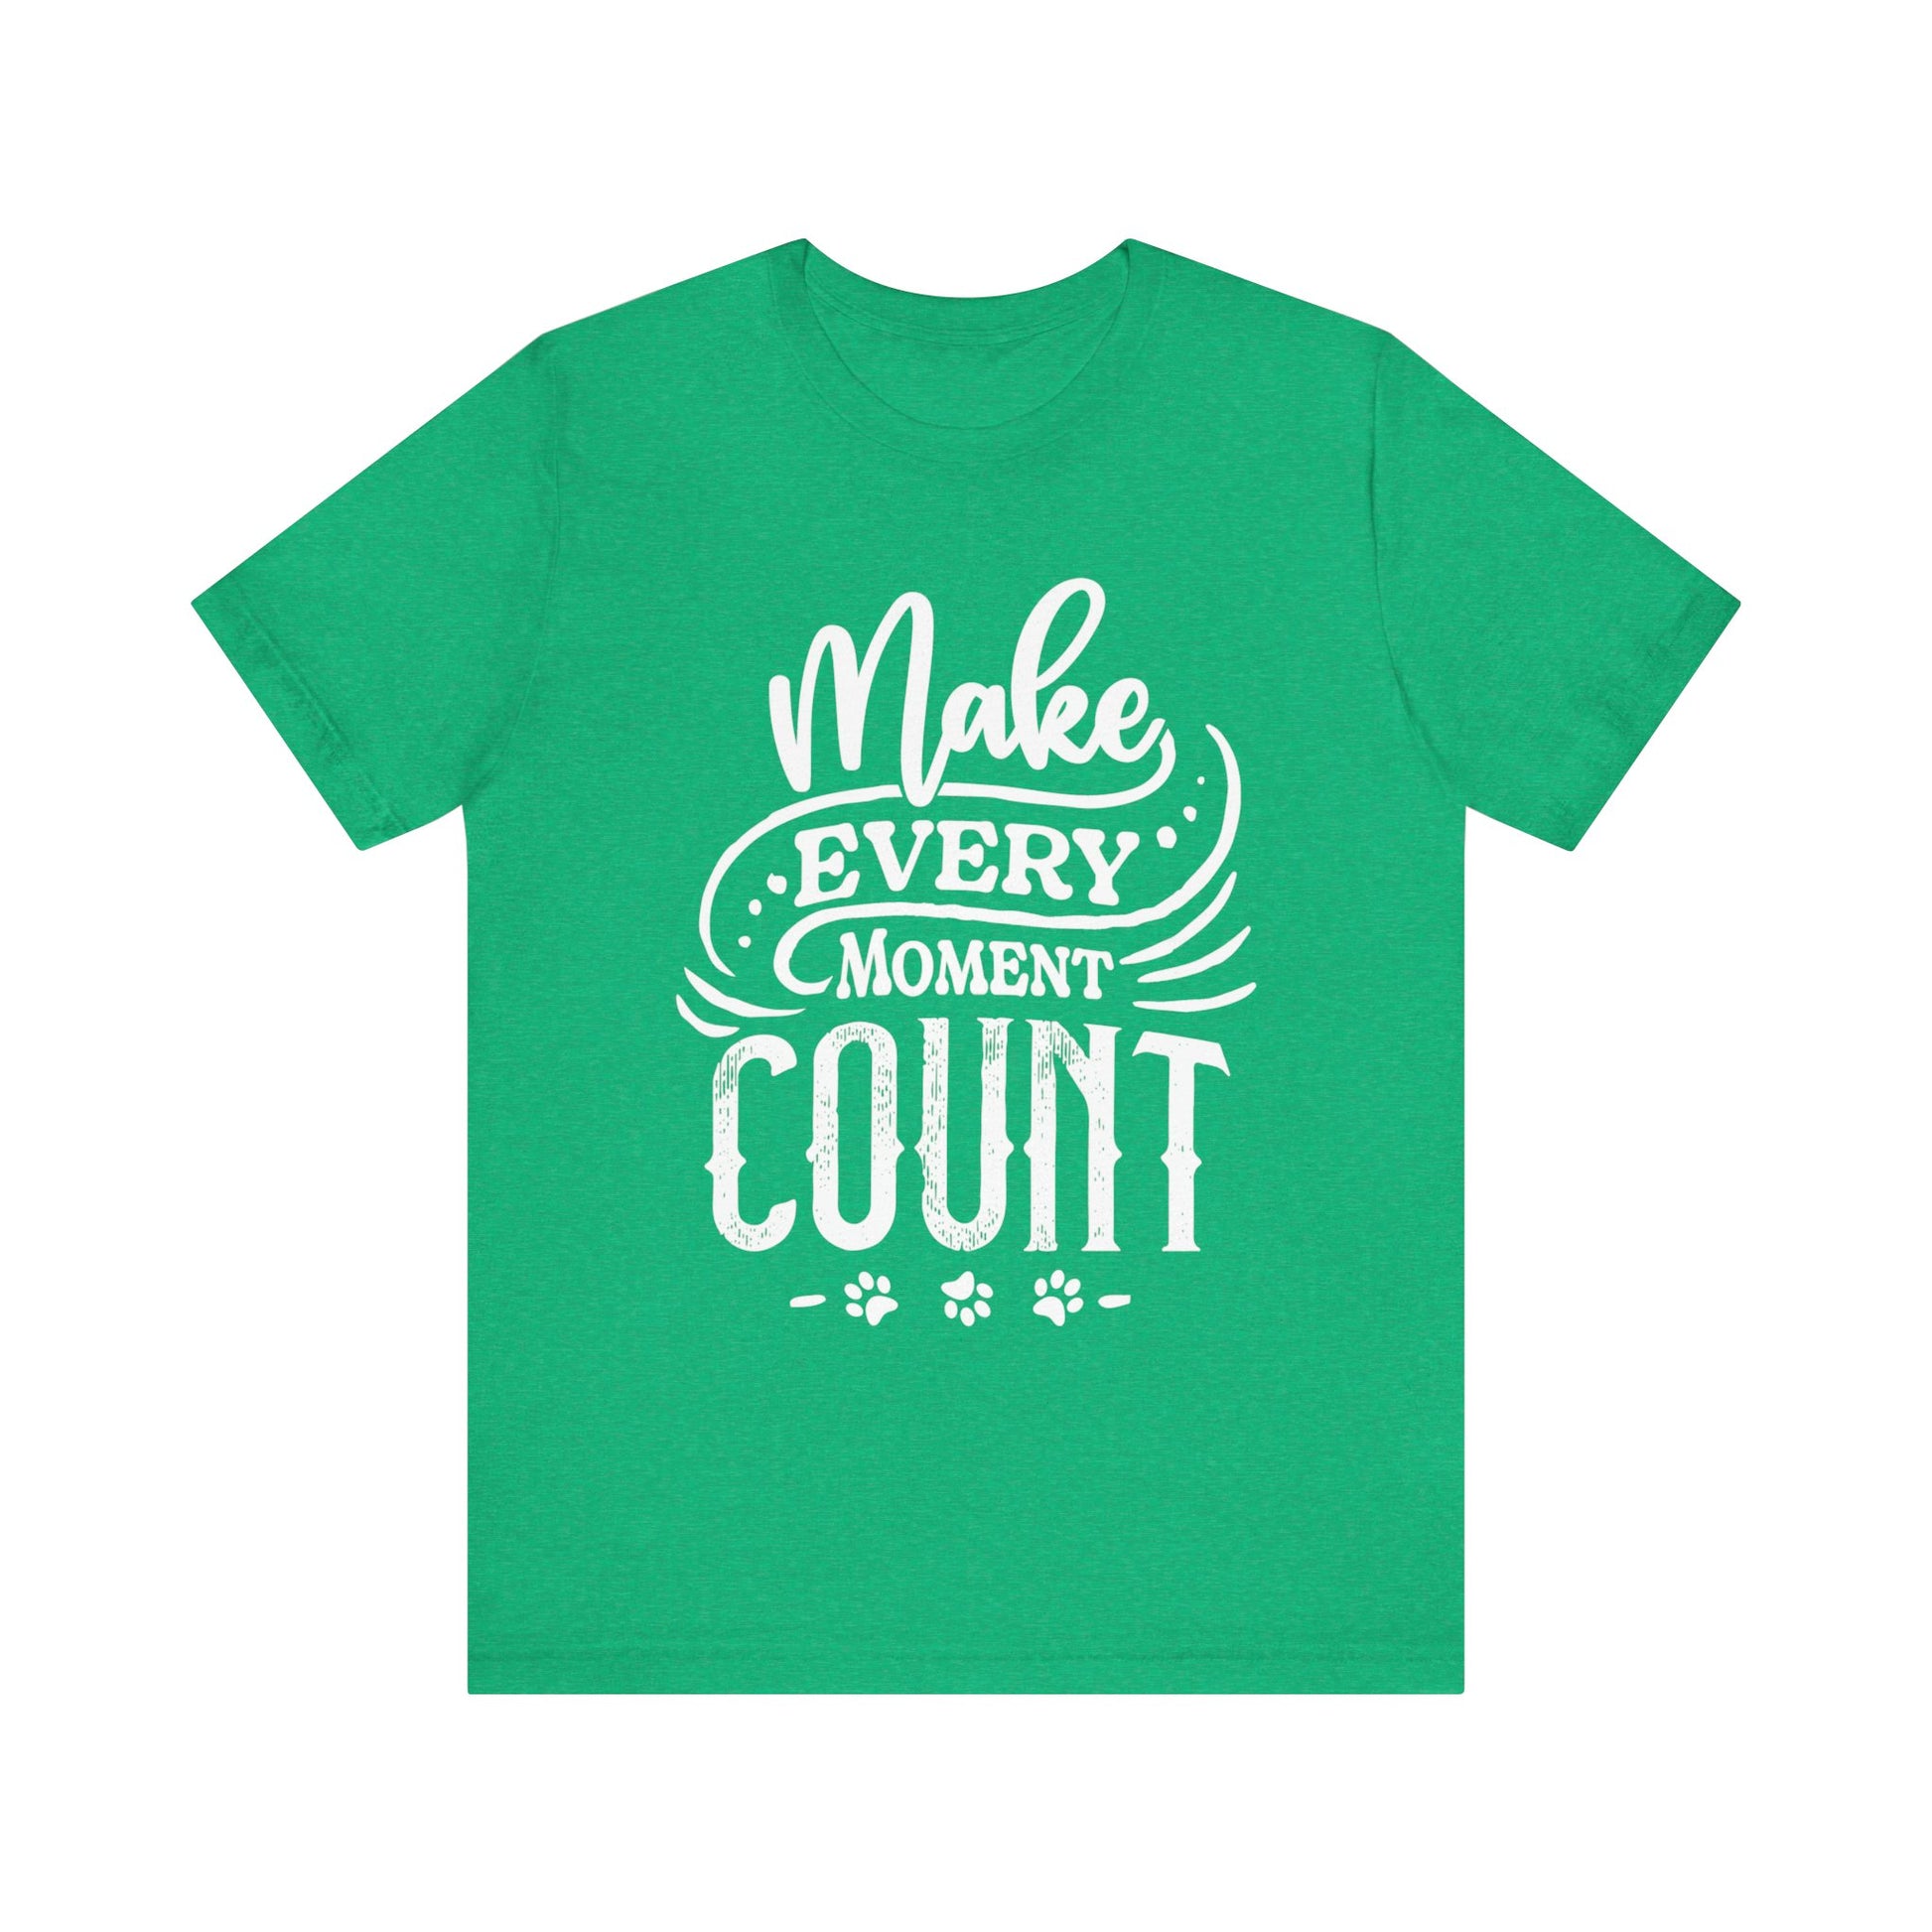 On a white canvas, a heather green Dogs Pure Love unisex tee showcases the slogan 'Make Every Moment Count.'